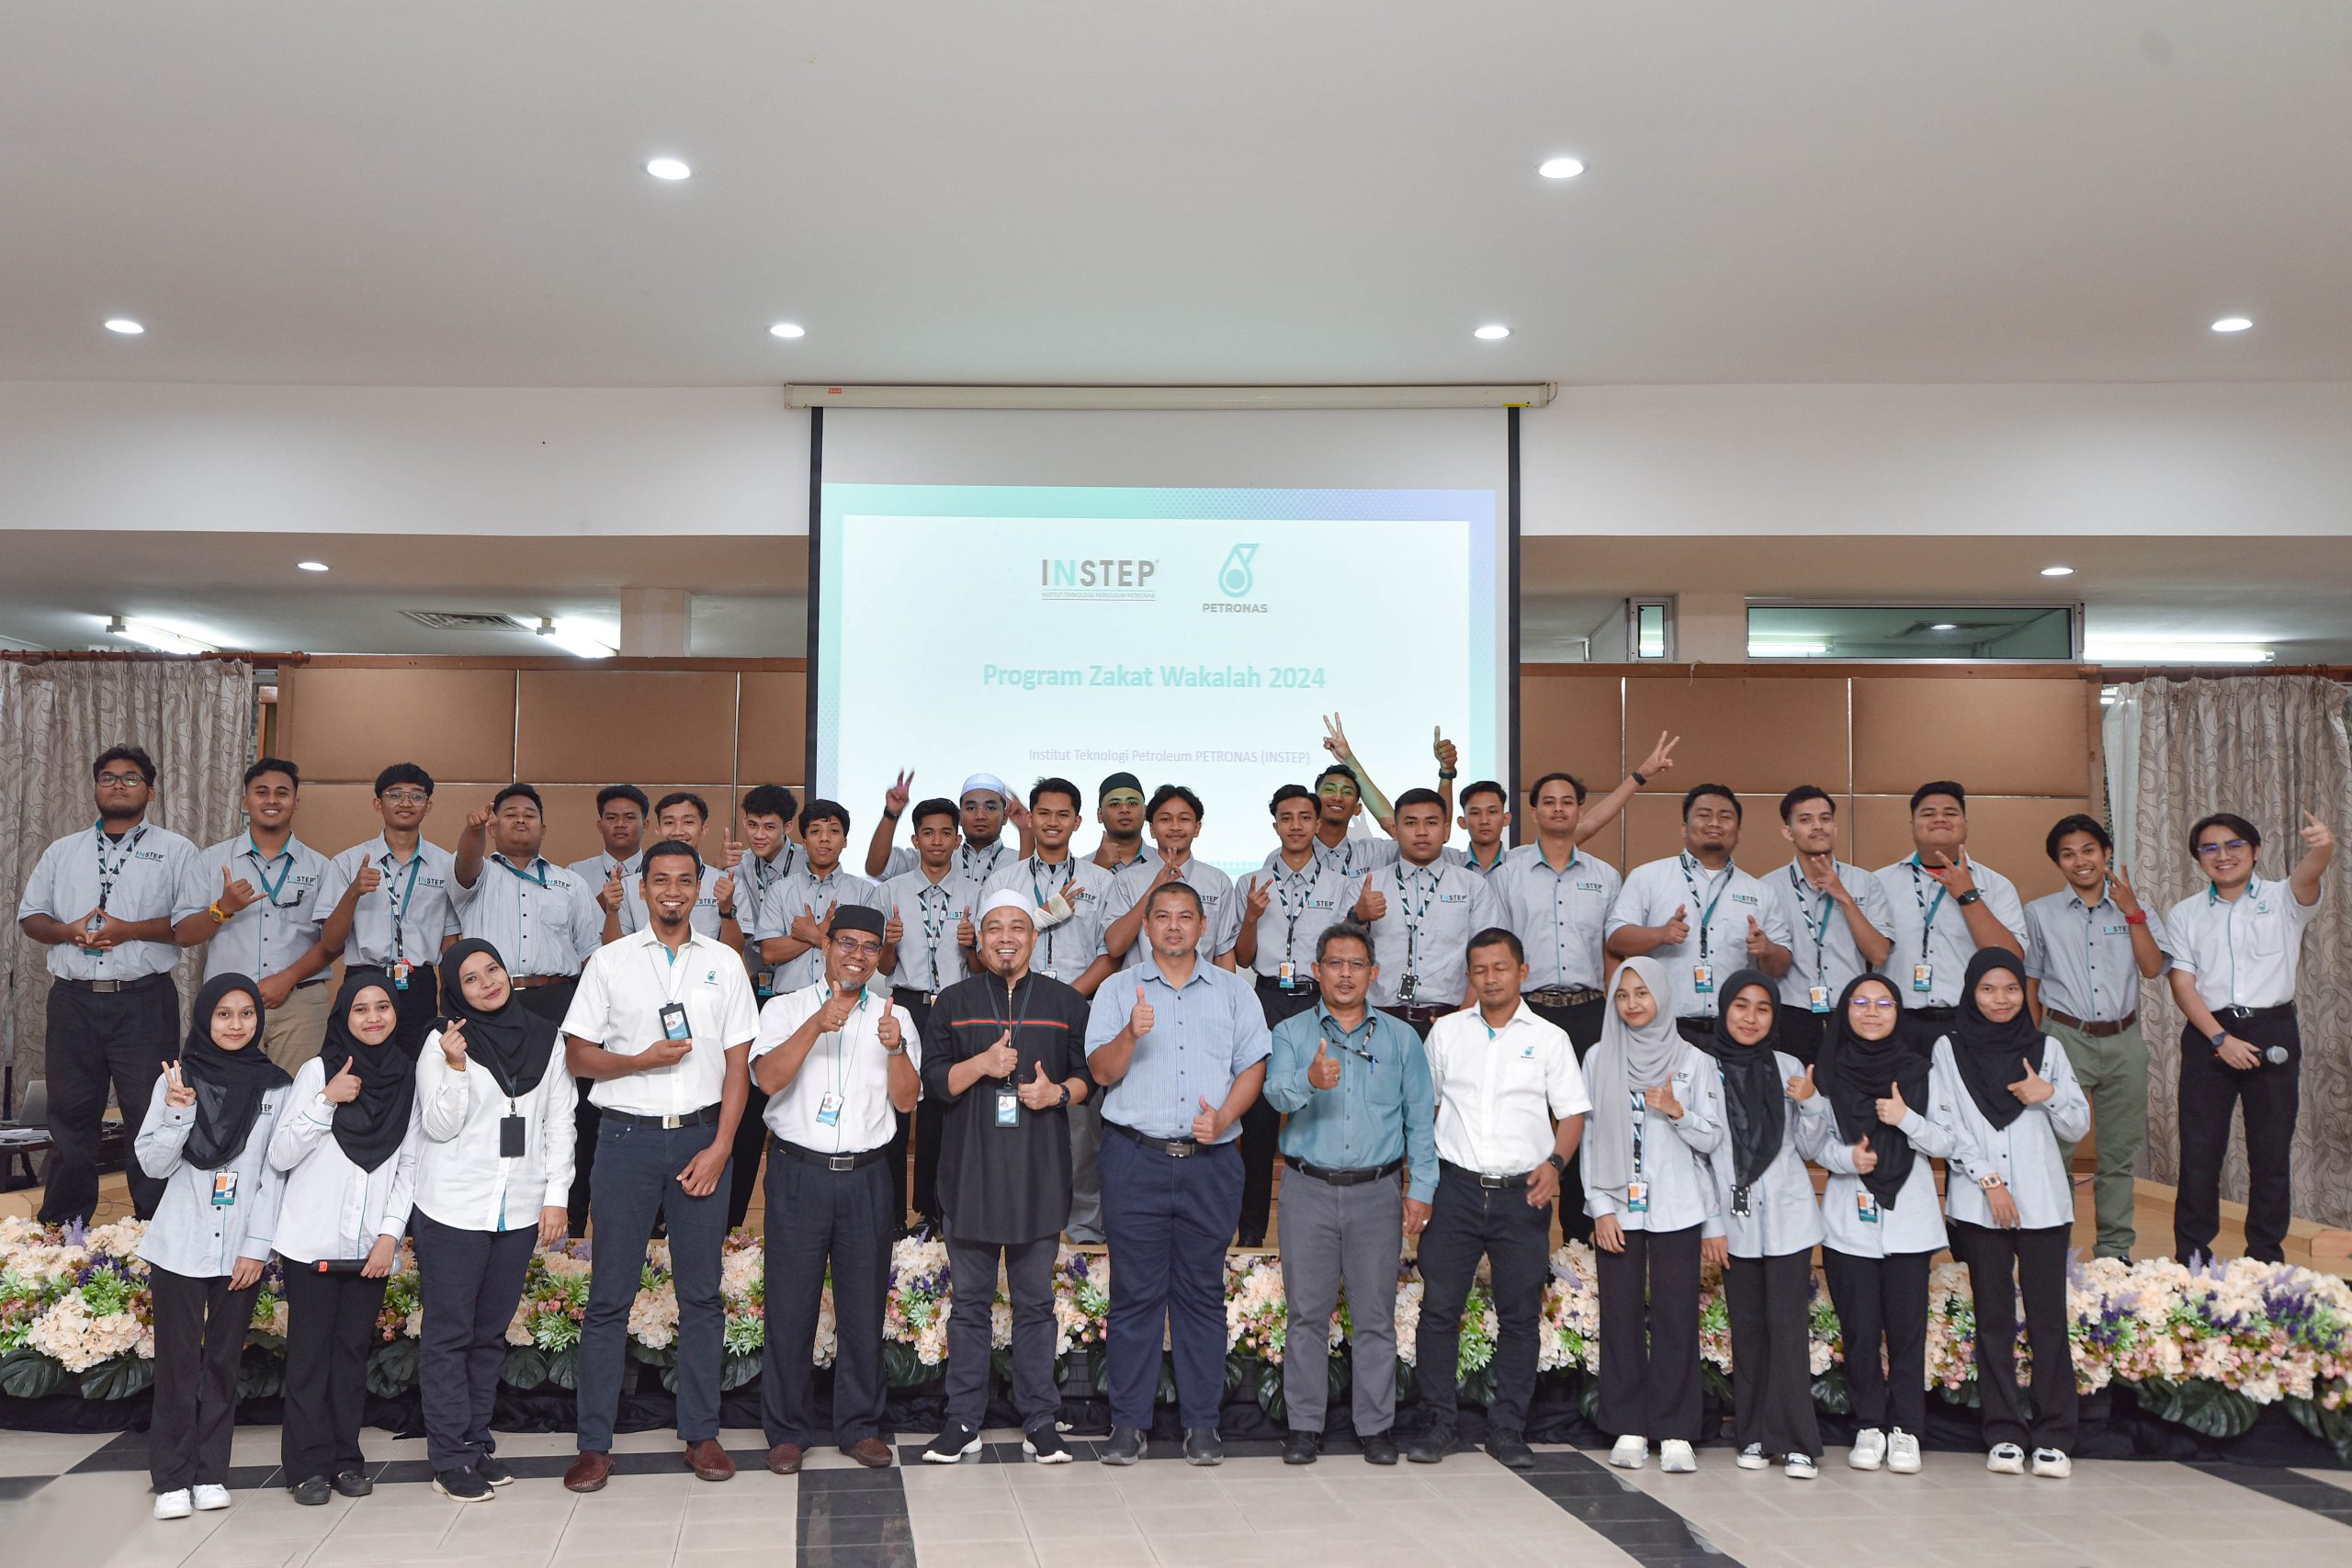 INSTEP Continues to Contribute to Local Communities through Zakat Wakalah Technical Programme